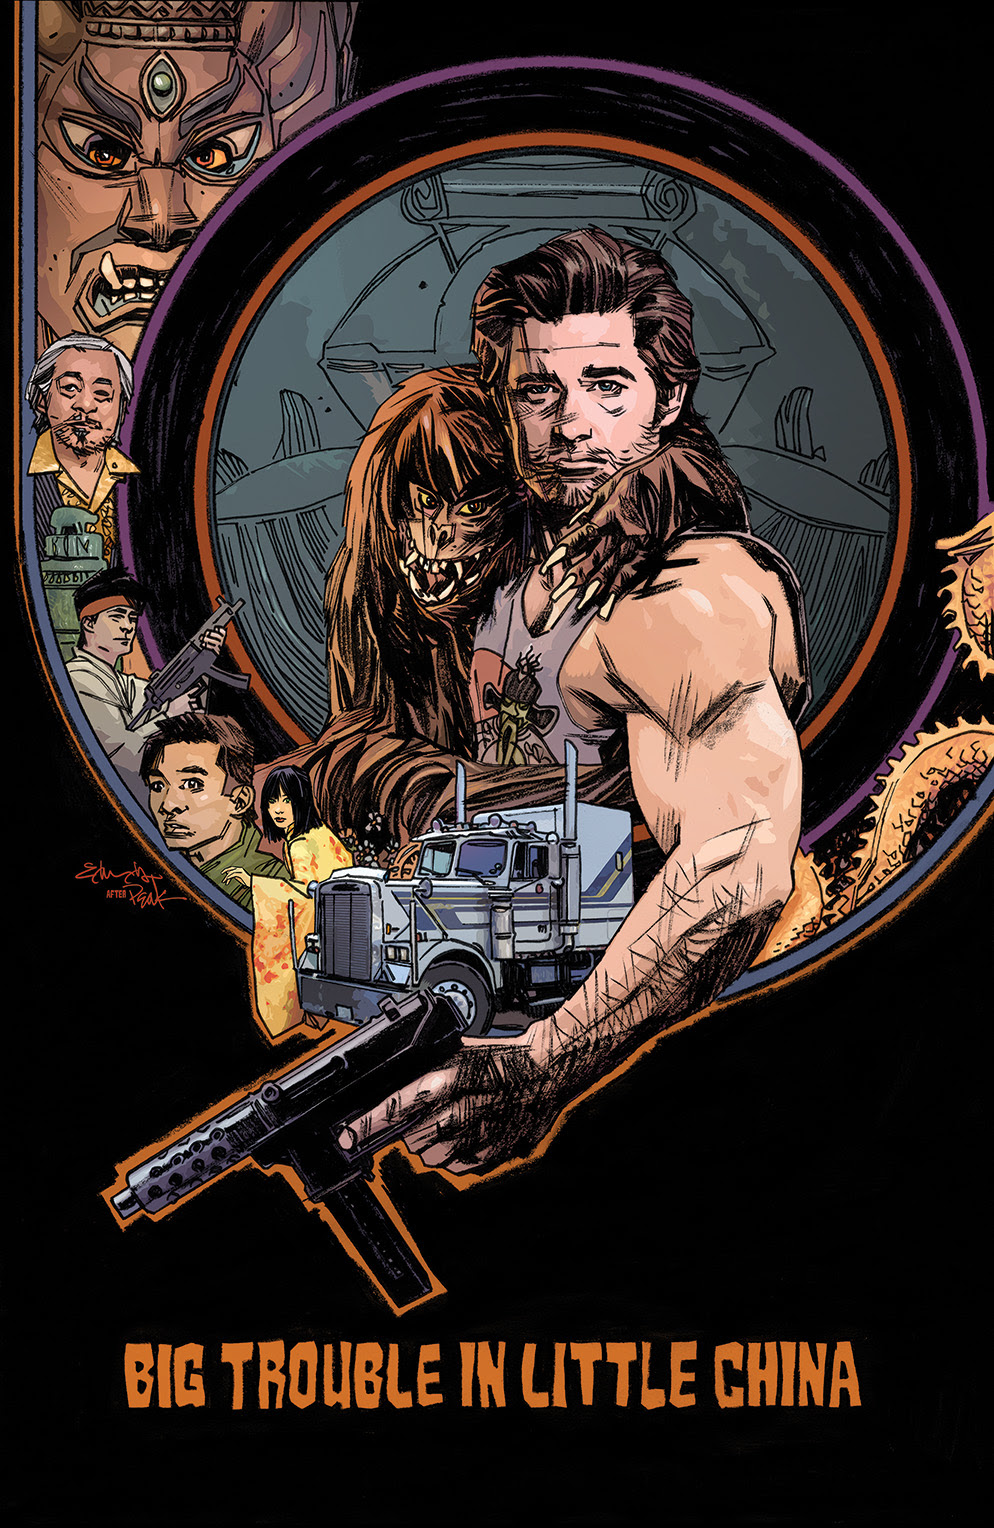 BIG TROUBLE IN LITTLE CHINA #3 Cover C by Tommy Lee Edwards